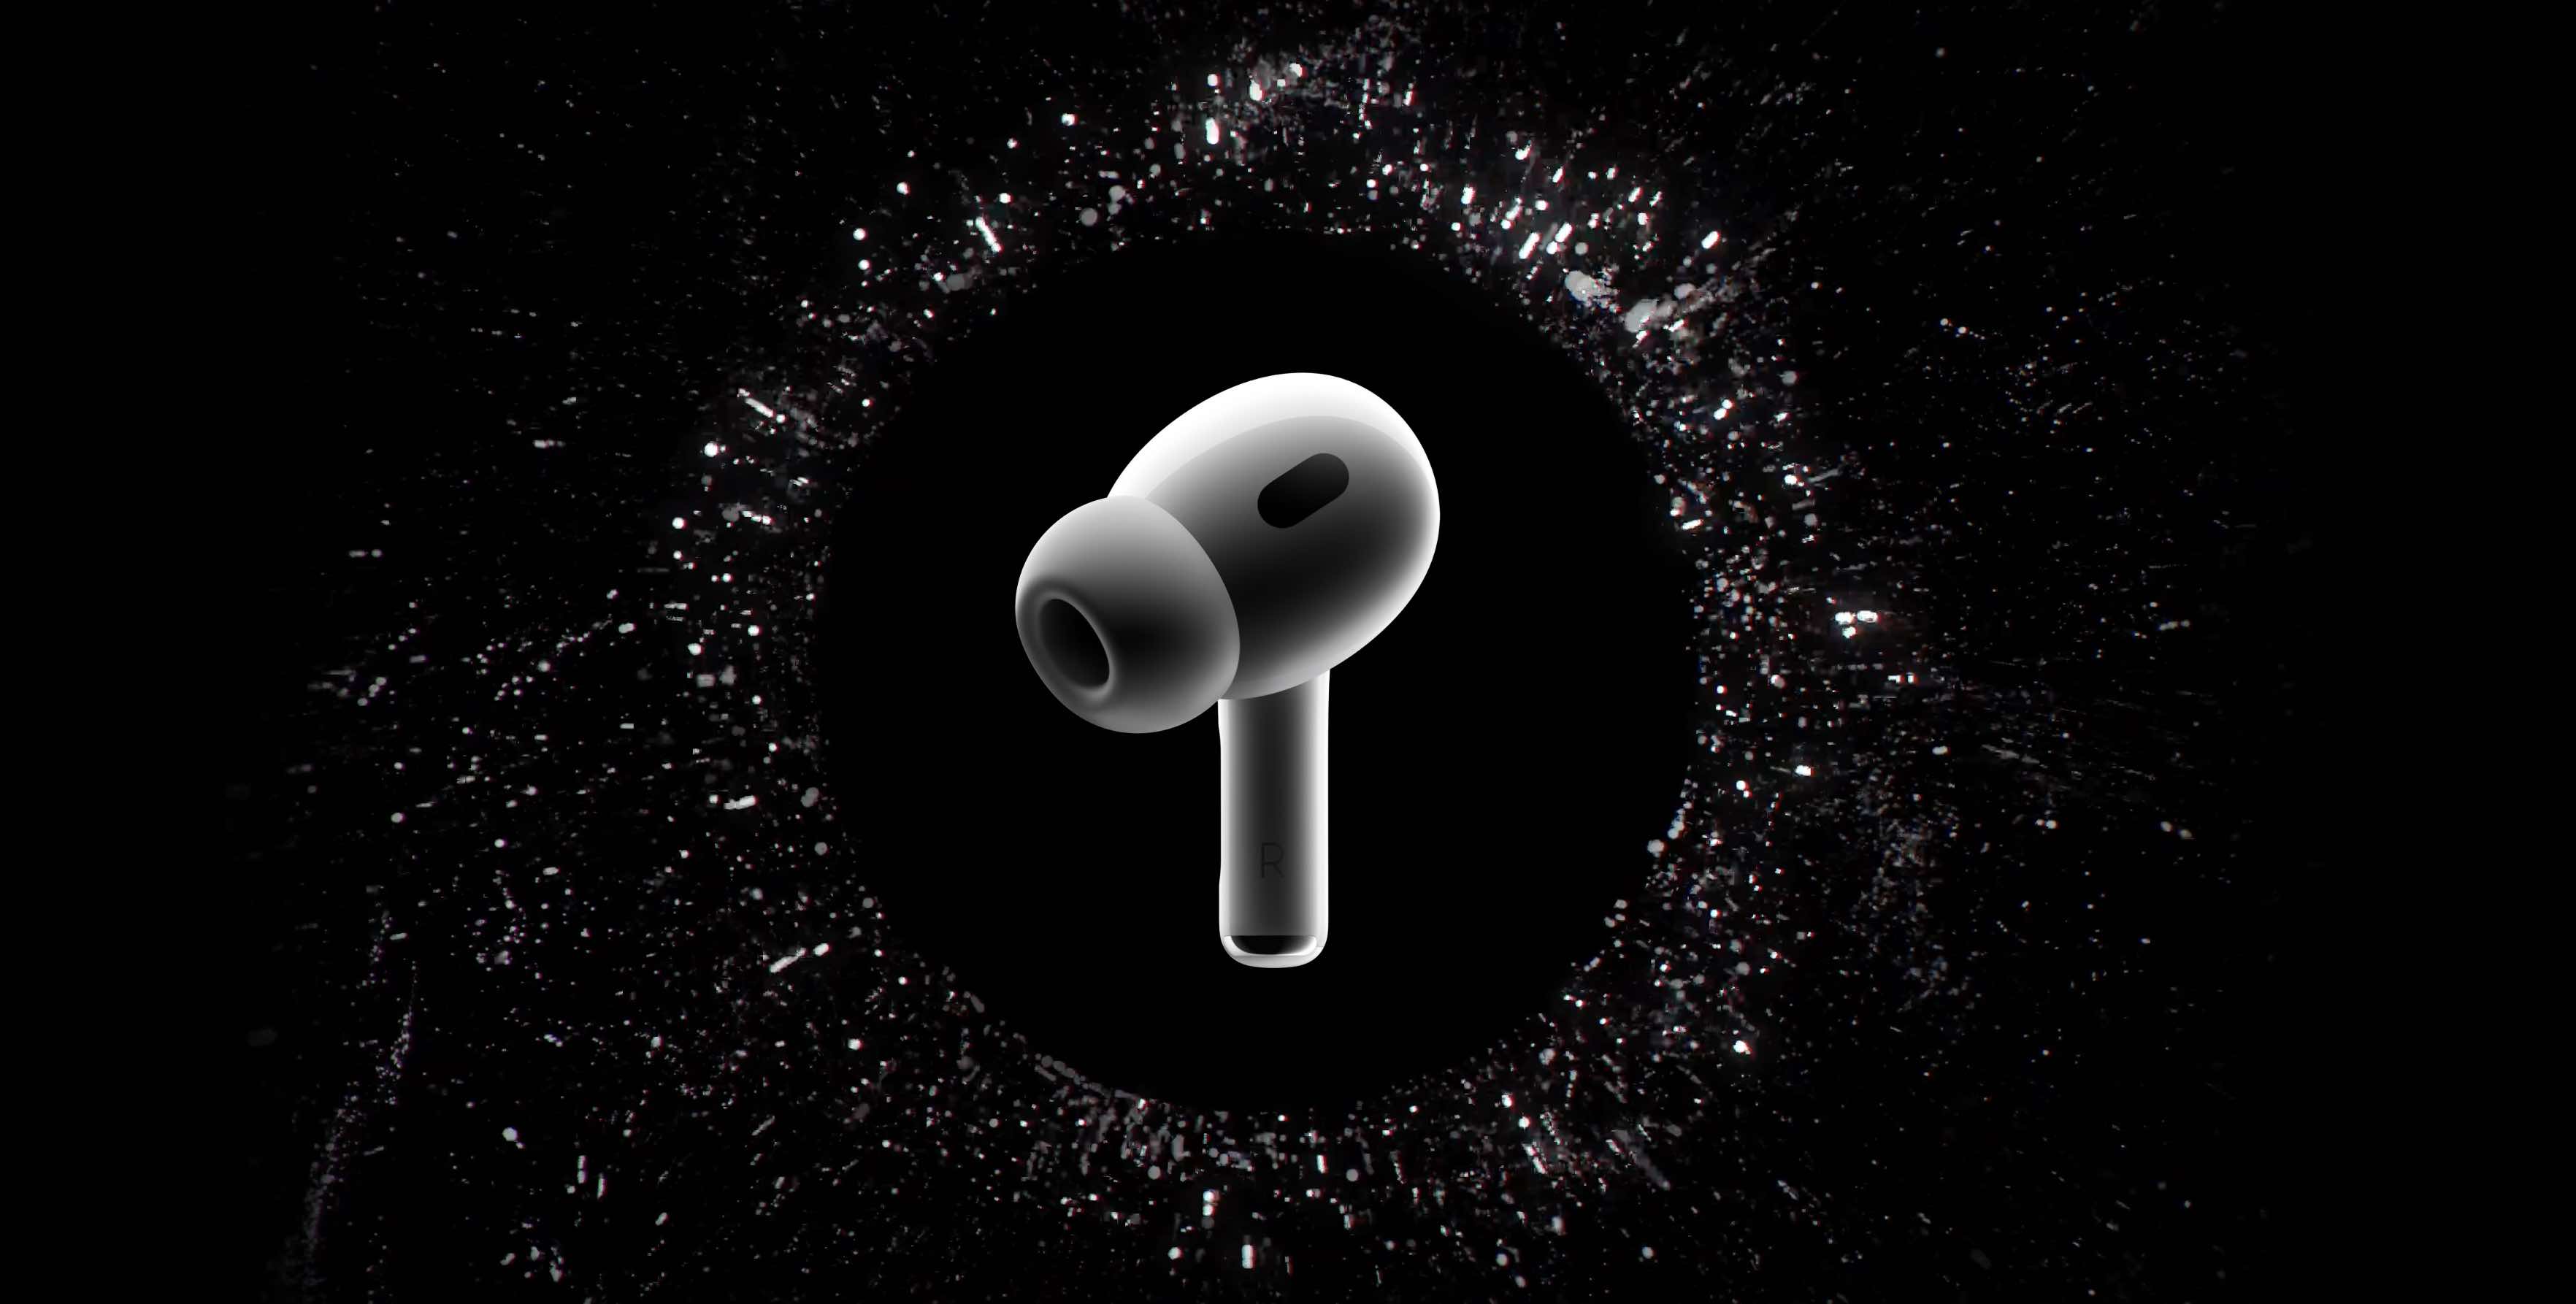 kaskade Gætte Stramme Apple talks about the lack of Lossless audio in AirPods Pro 2